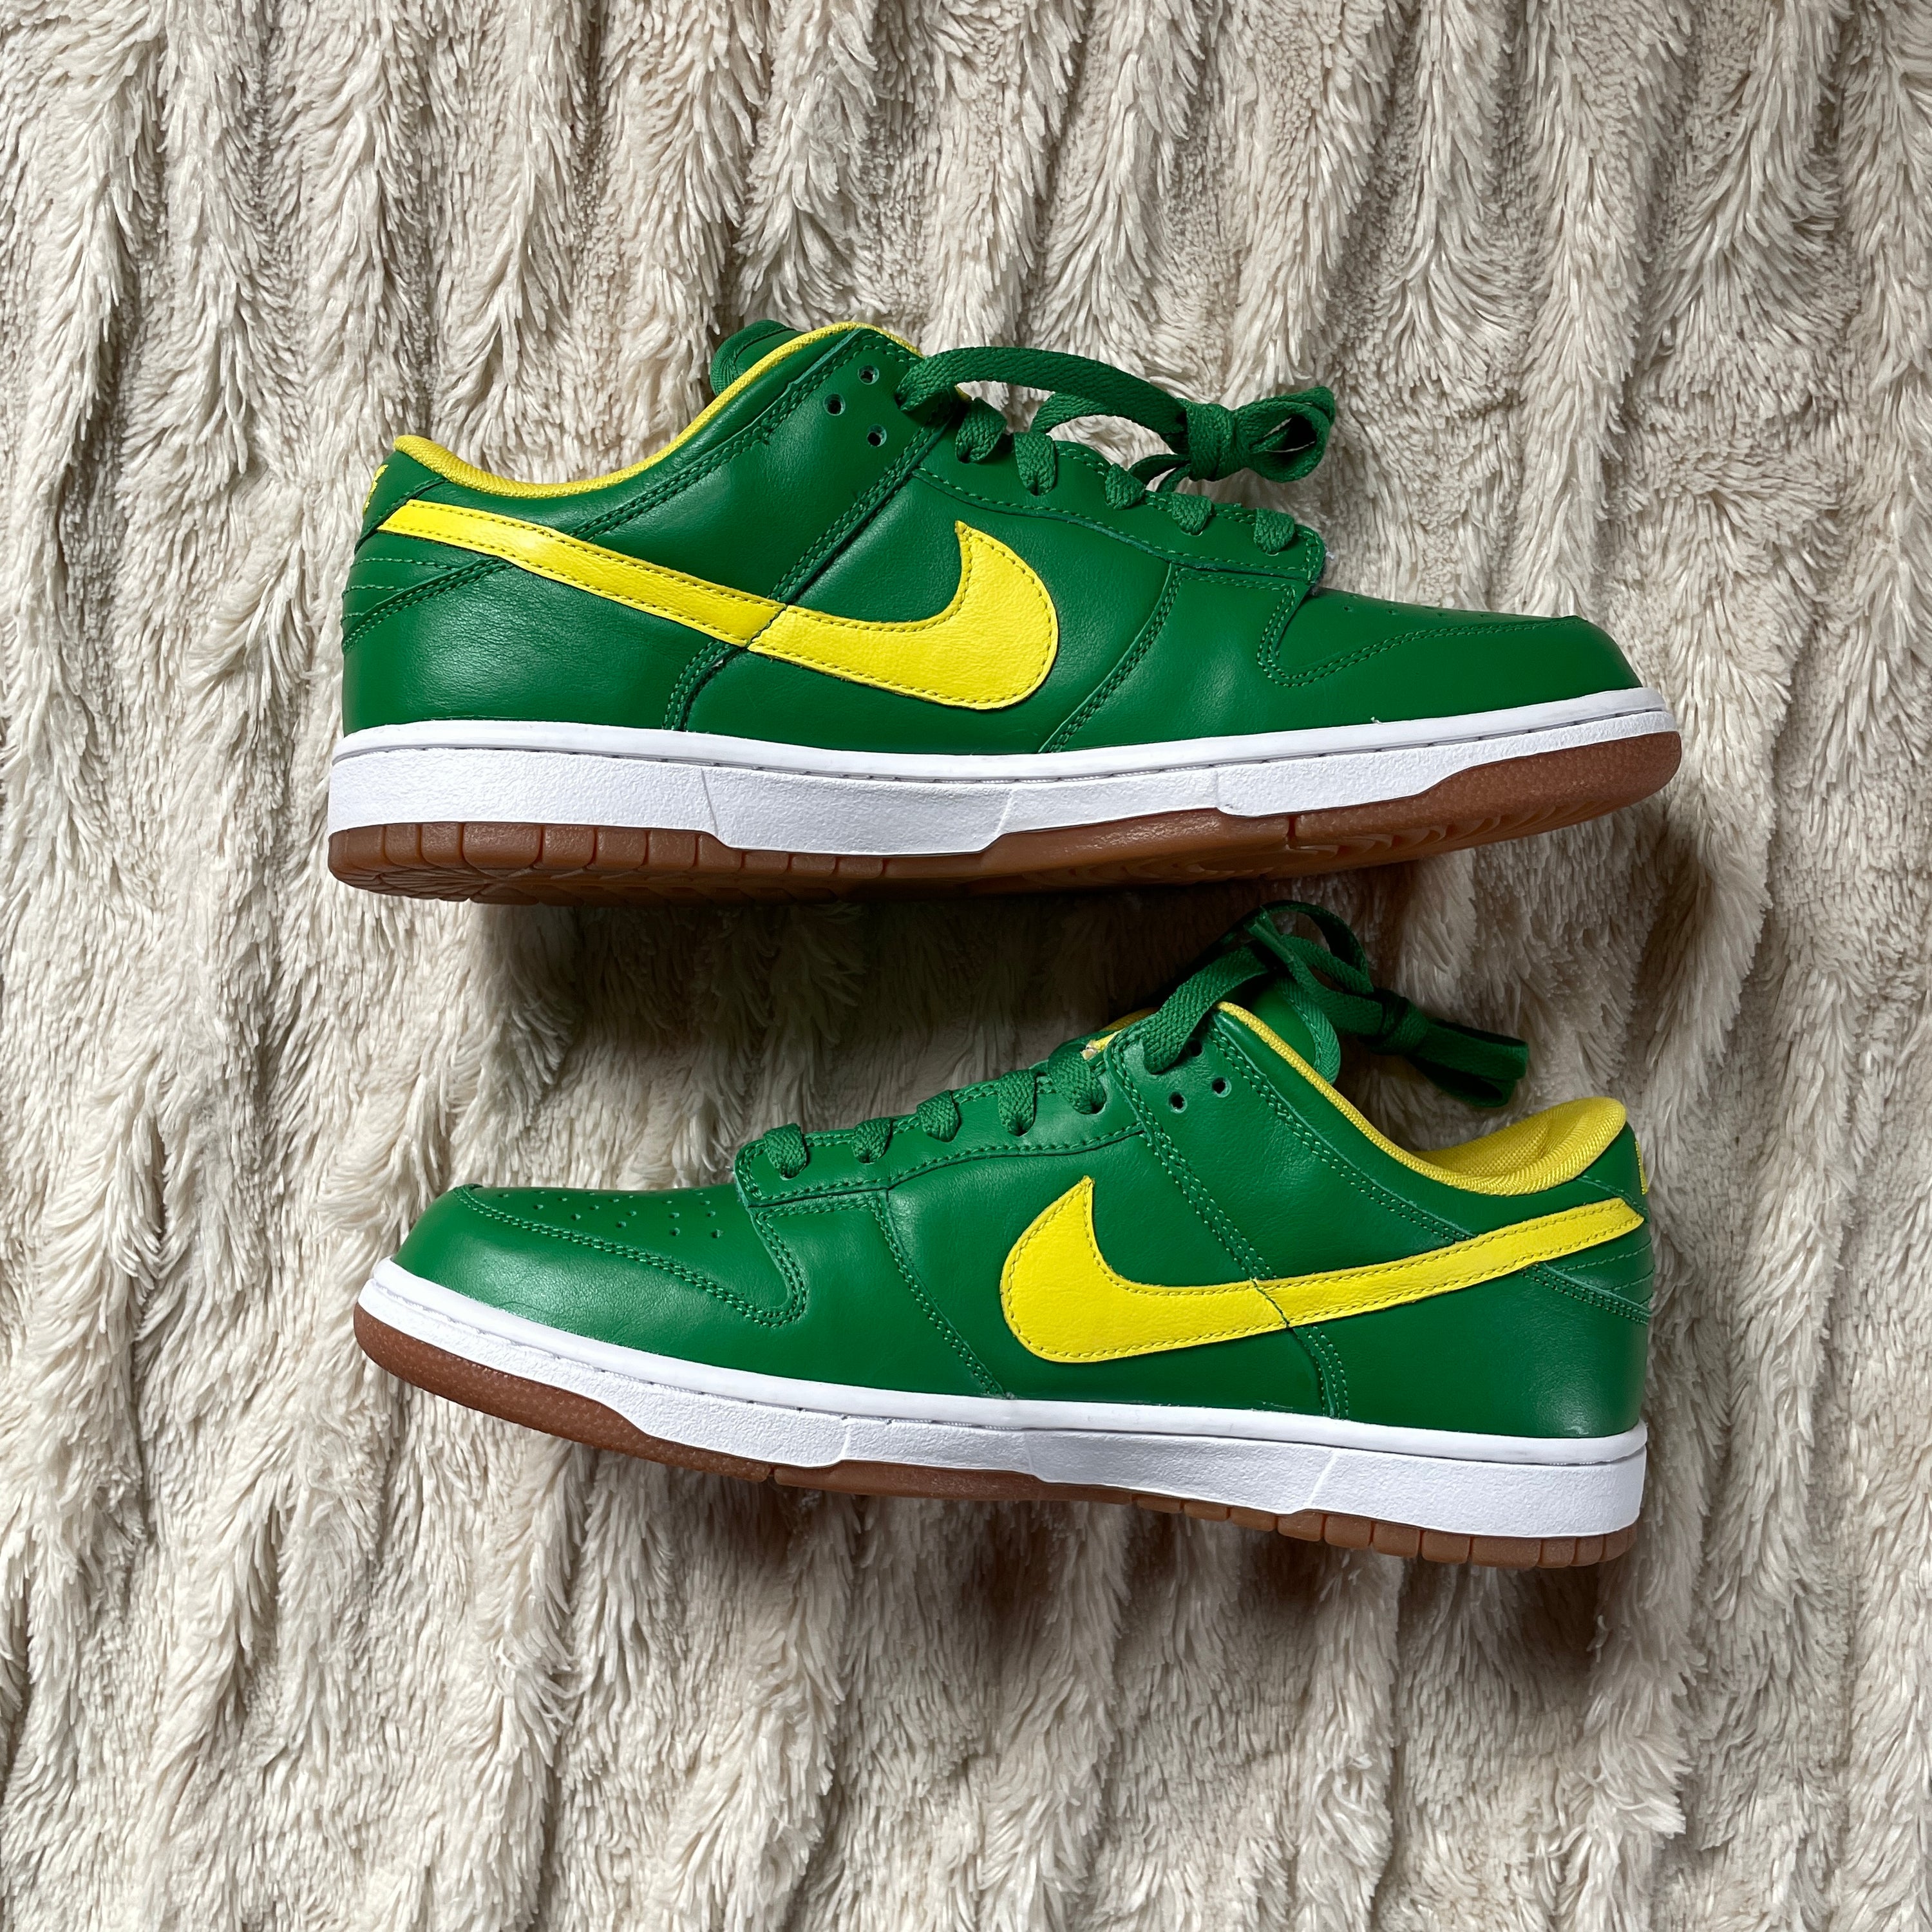 US 9.5 - NIKE DUNK LOW ID COLLEGE PACK "OREGON GREEN" [2017]